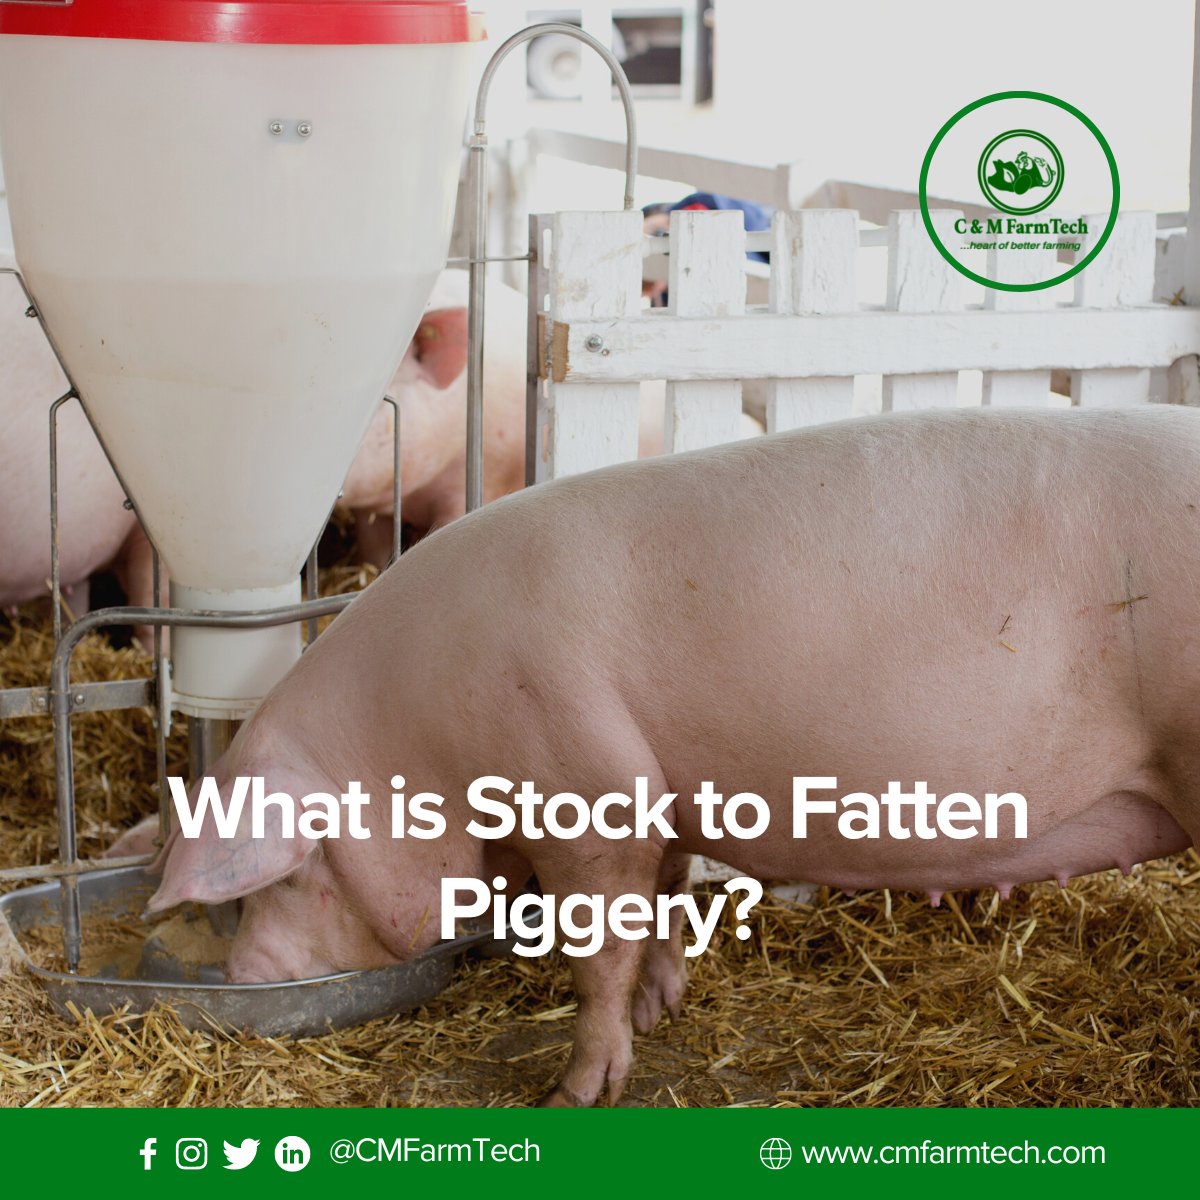 🐖 Source for quality genetics.

🐖 Manage your resources appropriately.

🐖 Develop your skills and knowledge base.

🐖 Fatten numbers that make business sense.

🐖 Ensure strict biosecurity.

🐖 Understand your market.
#Piggery #pigfarming #piggerybusiness #NewWeekNewGoals